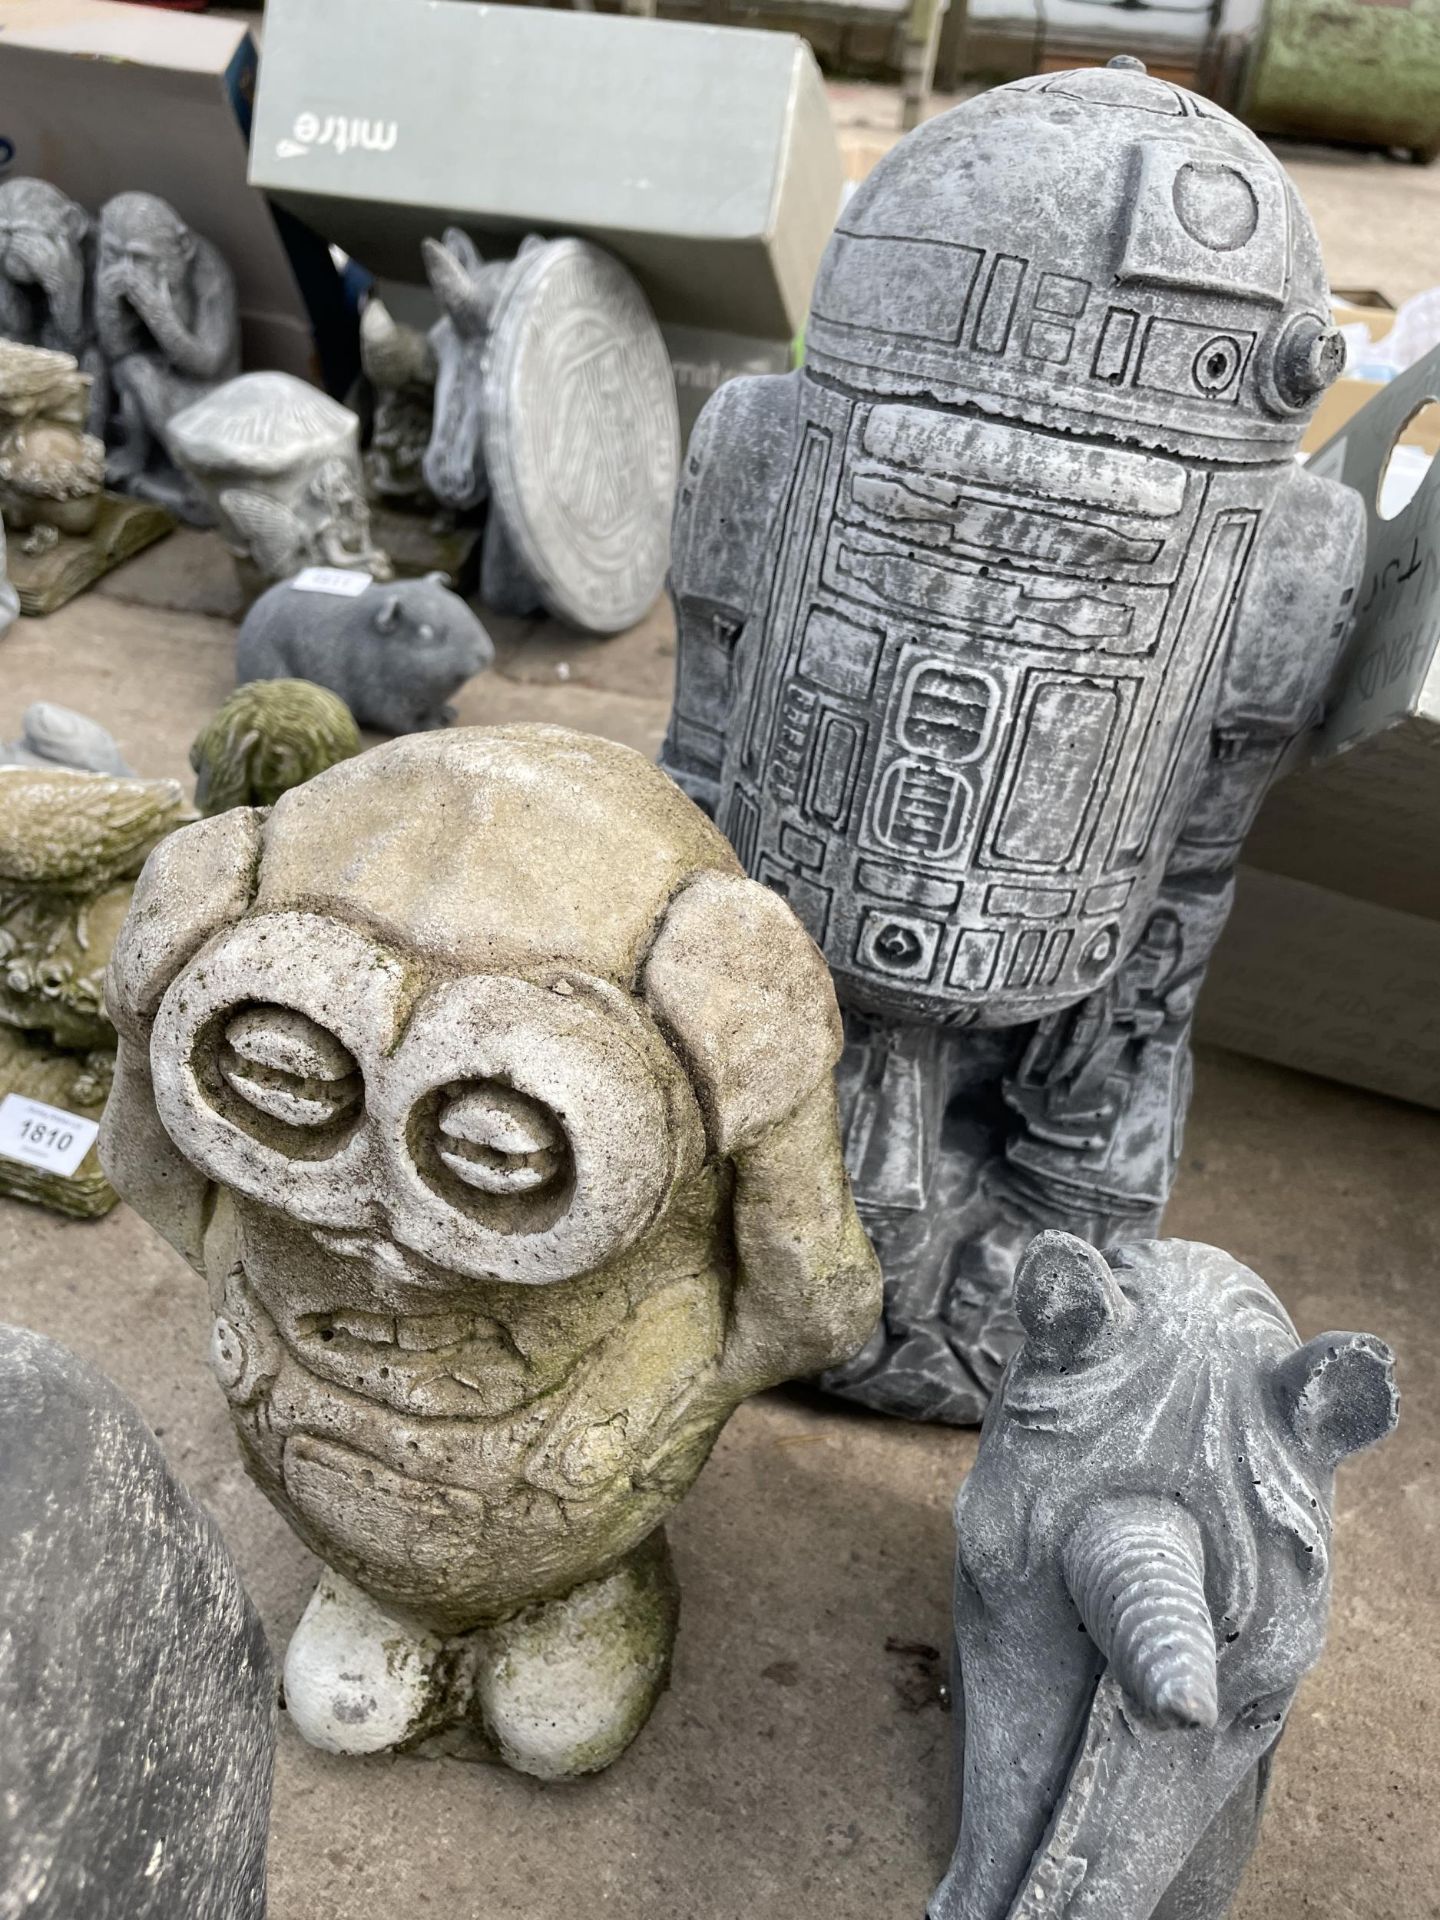 FIVE VARIOUS CONCRETE GARDEN FIGURES TO INCLUDE DARTH VADER AND A HORSE HEAD ETC - Image 3 of 3